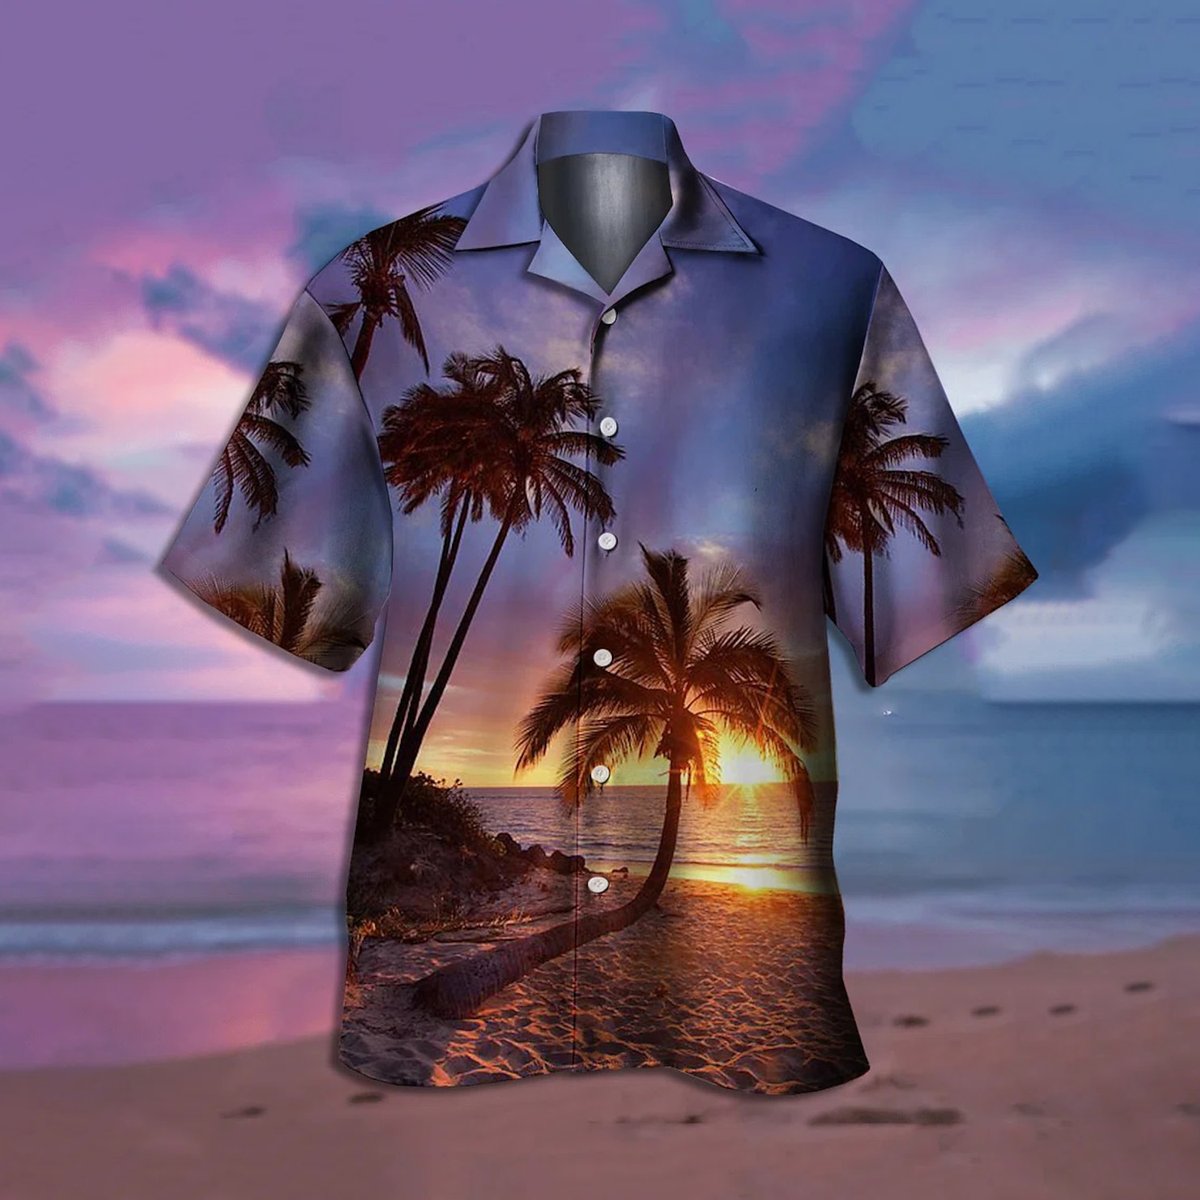 🌴 Get ready to go coconuts for our funky Hawaiian shirt 🥥
Stand out from the crowd with this playful print, perfect for any summer occasion 🌞 
#HawaiianShirt #CoconutPrint #SummerStyle

Get yours👉tropicaltrends.co/E7994